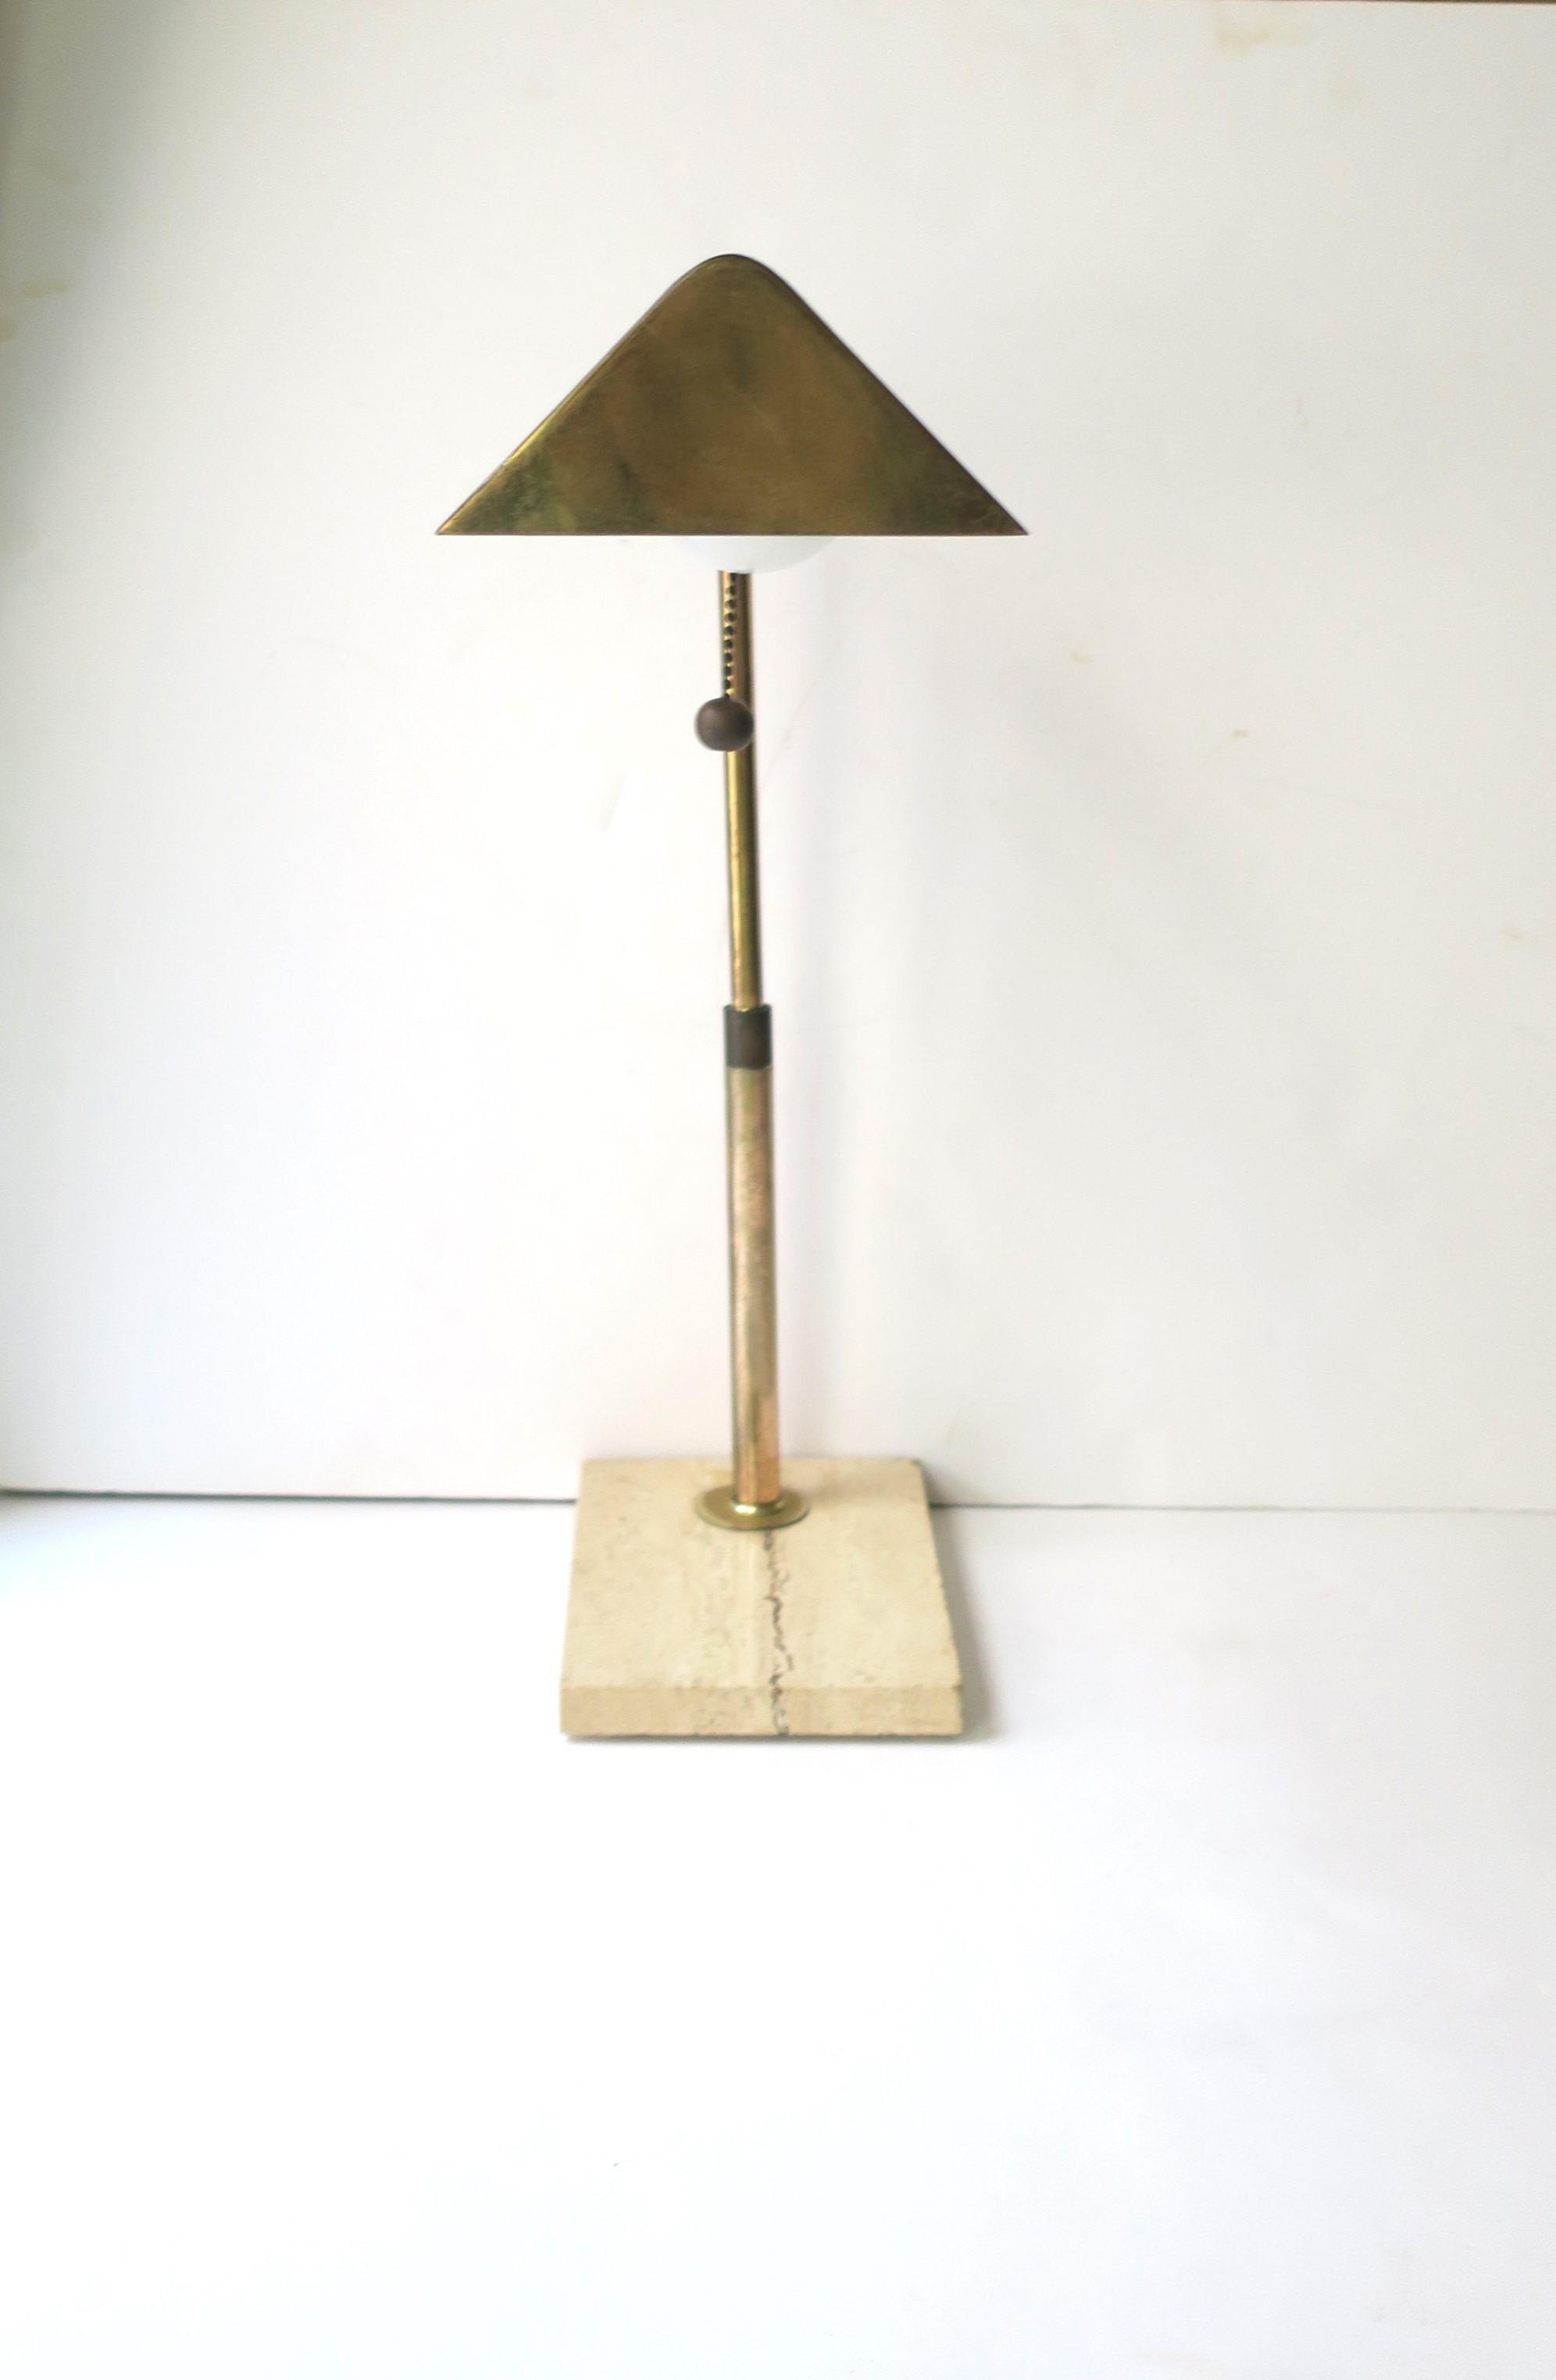 Italian Brass and Travertine Marble Desk or Table Lamp, circa 1960s 1970s For Sale 2